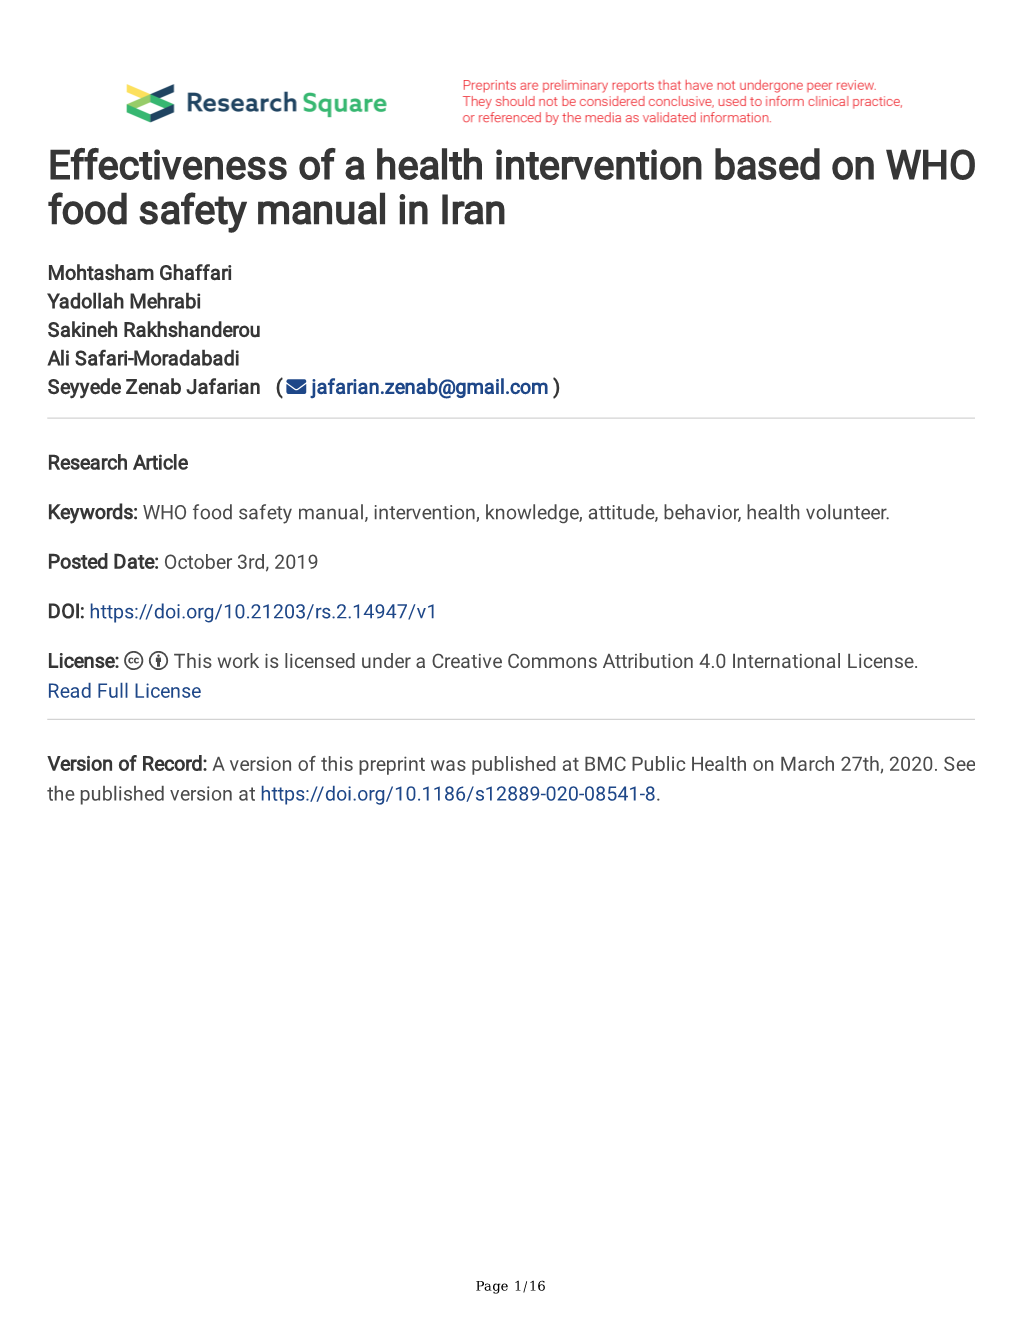 Effectiveness of a Health Intervention Based on WHO Food Safety Manual in Iran